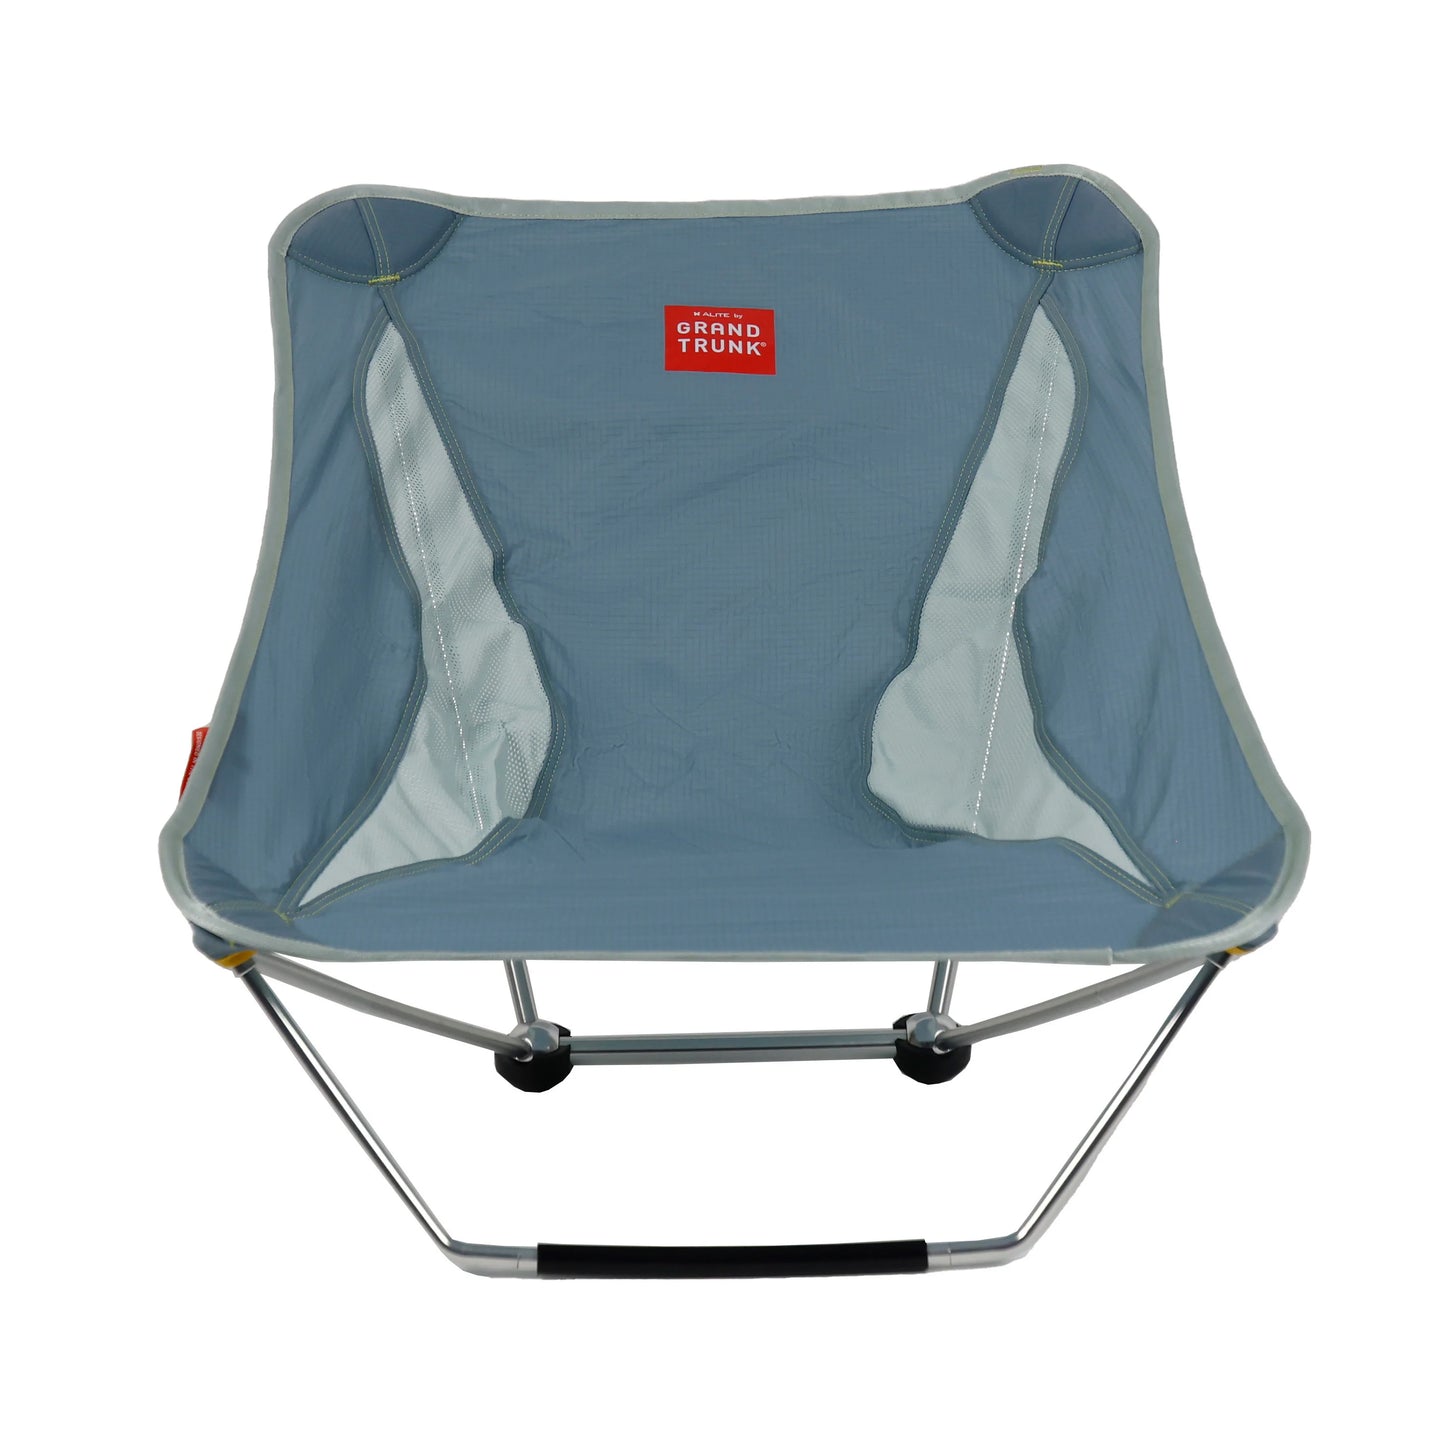 MAYFLY LOW GROUND CHAIR